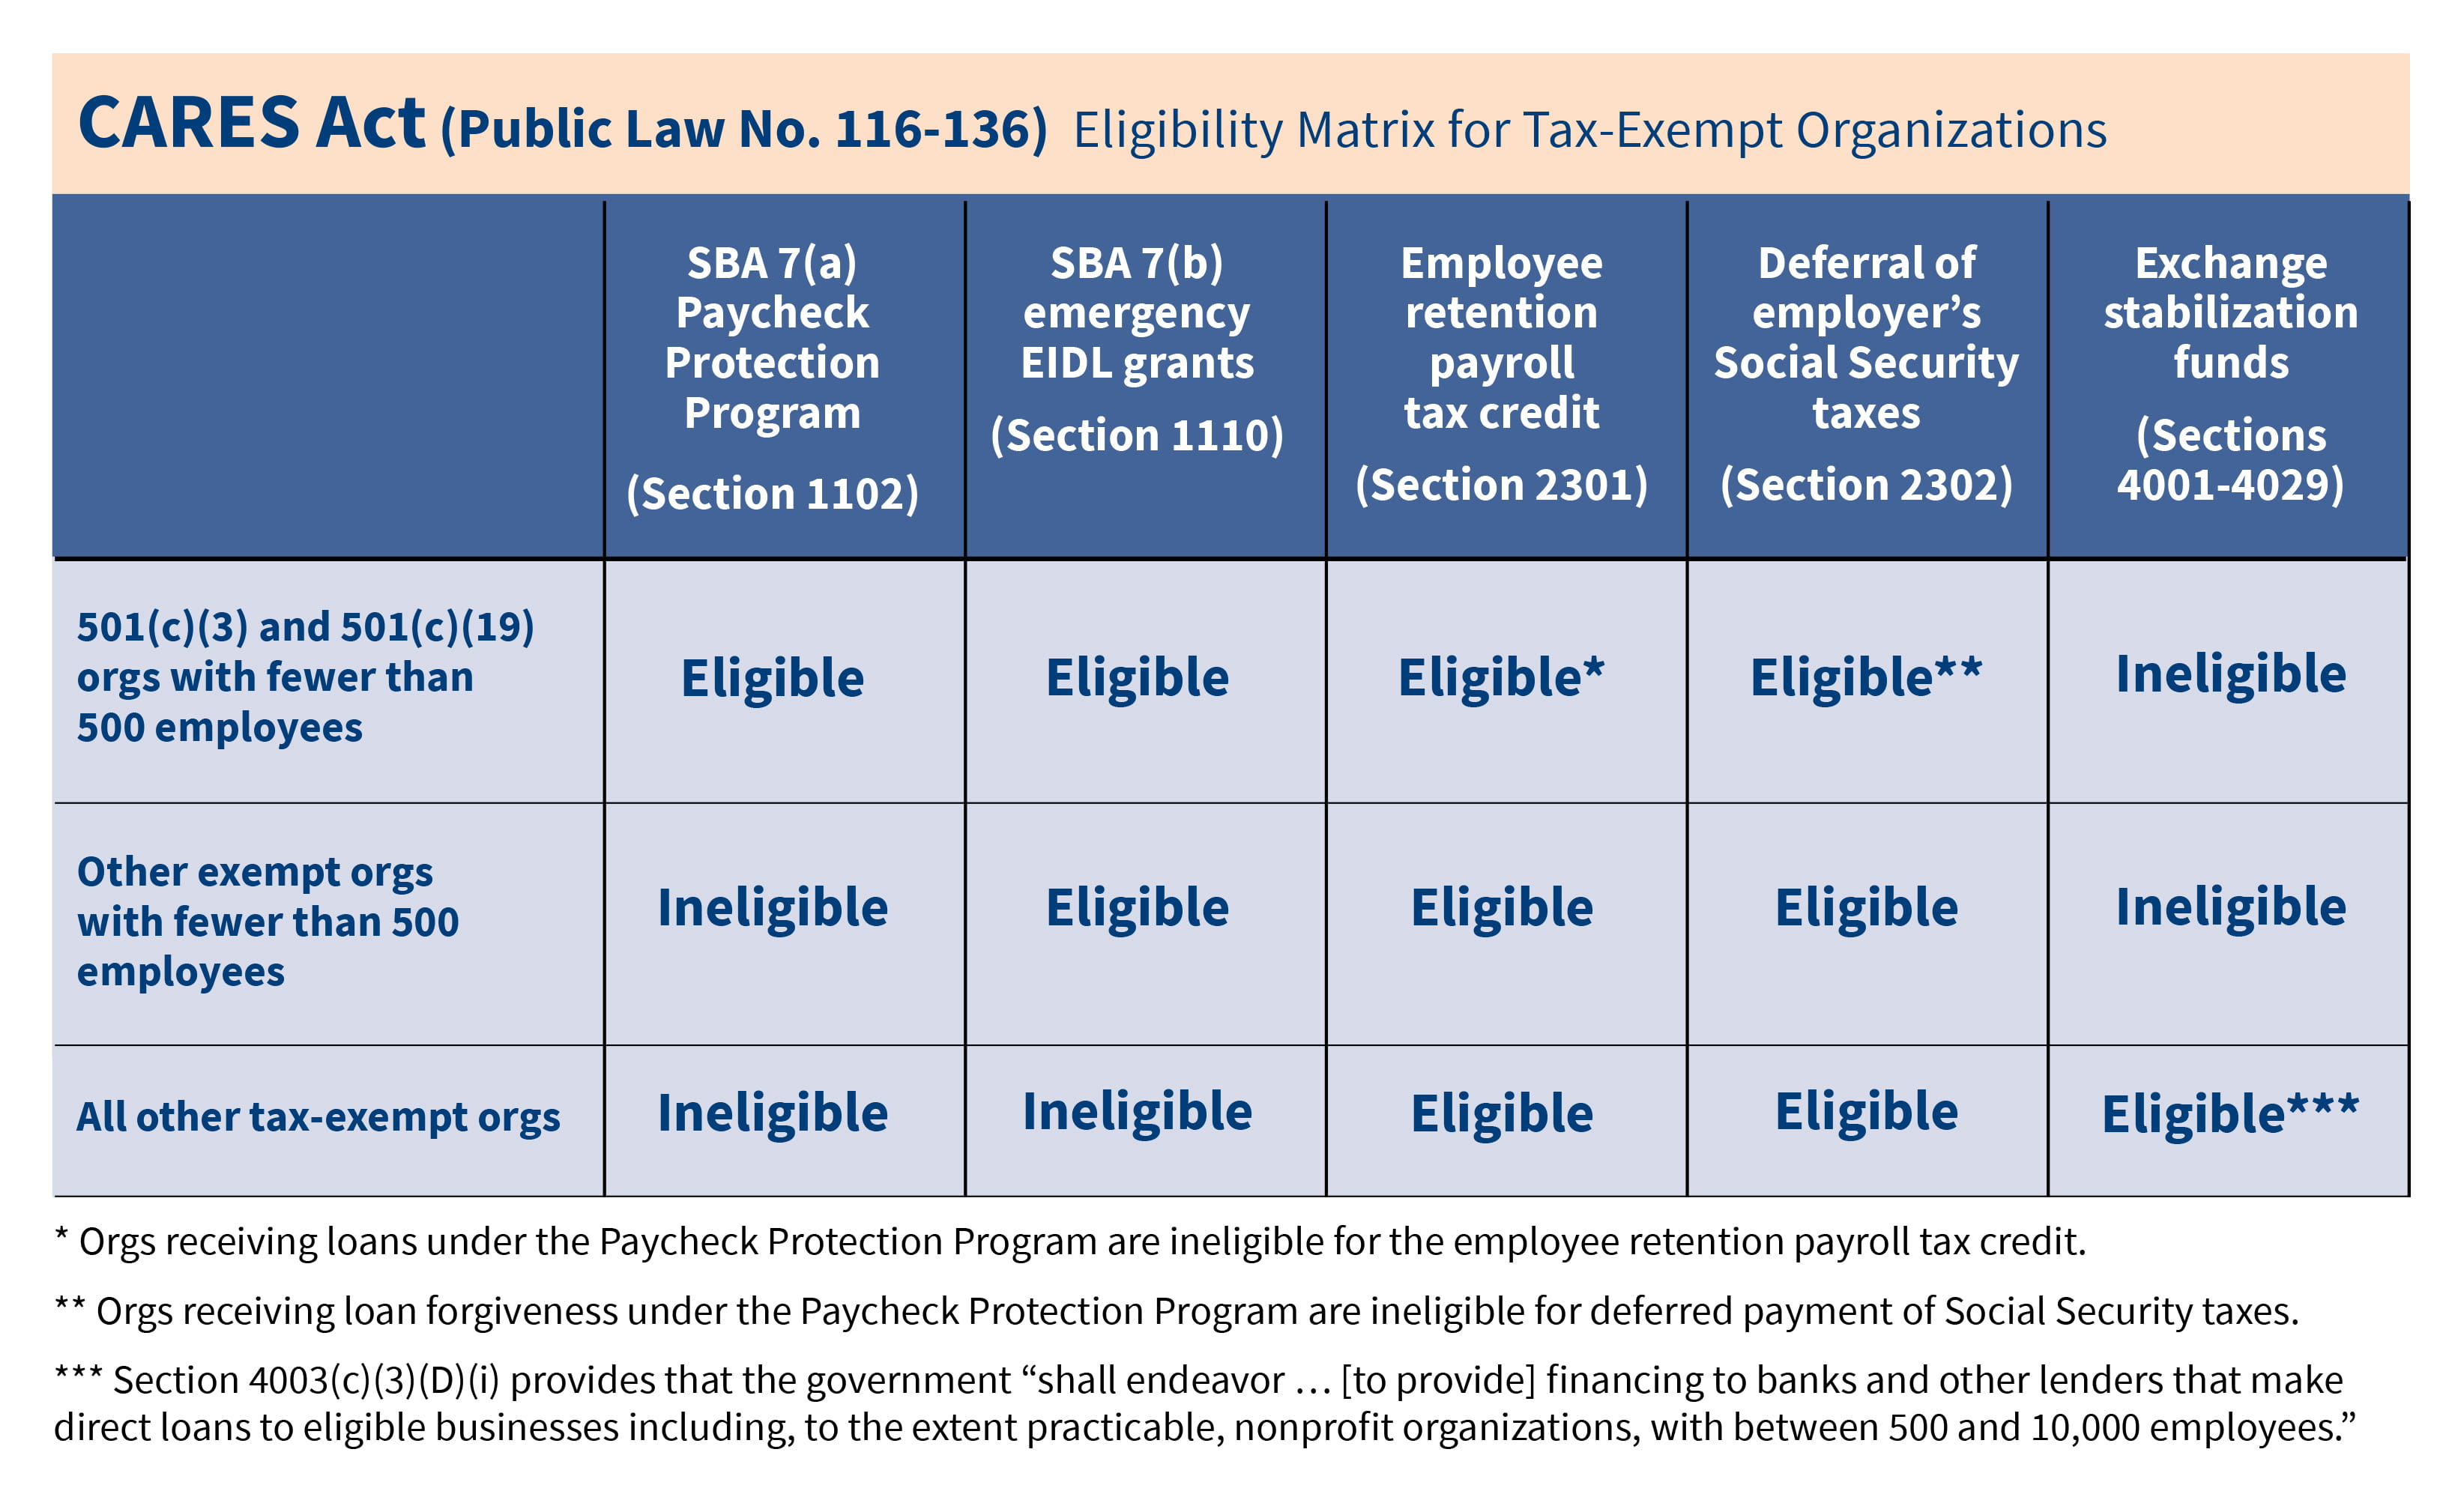 Table of eligibility matrix for tax exempt organizations under cares act